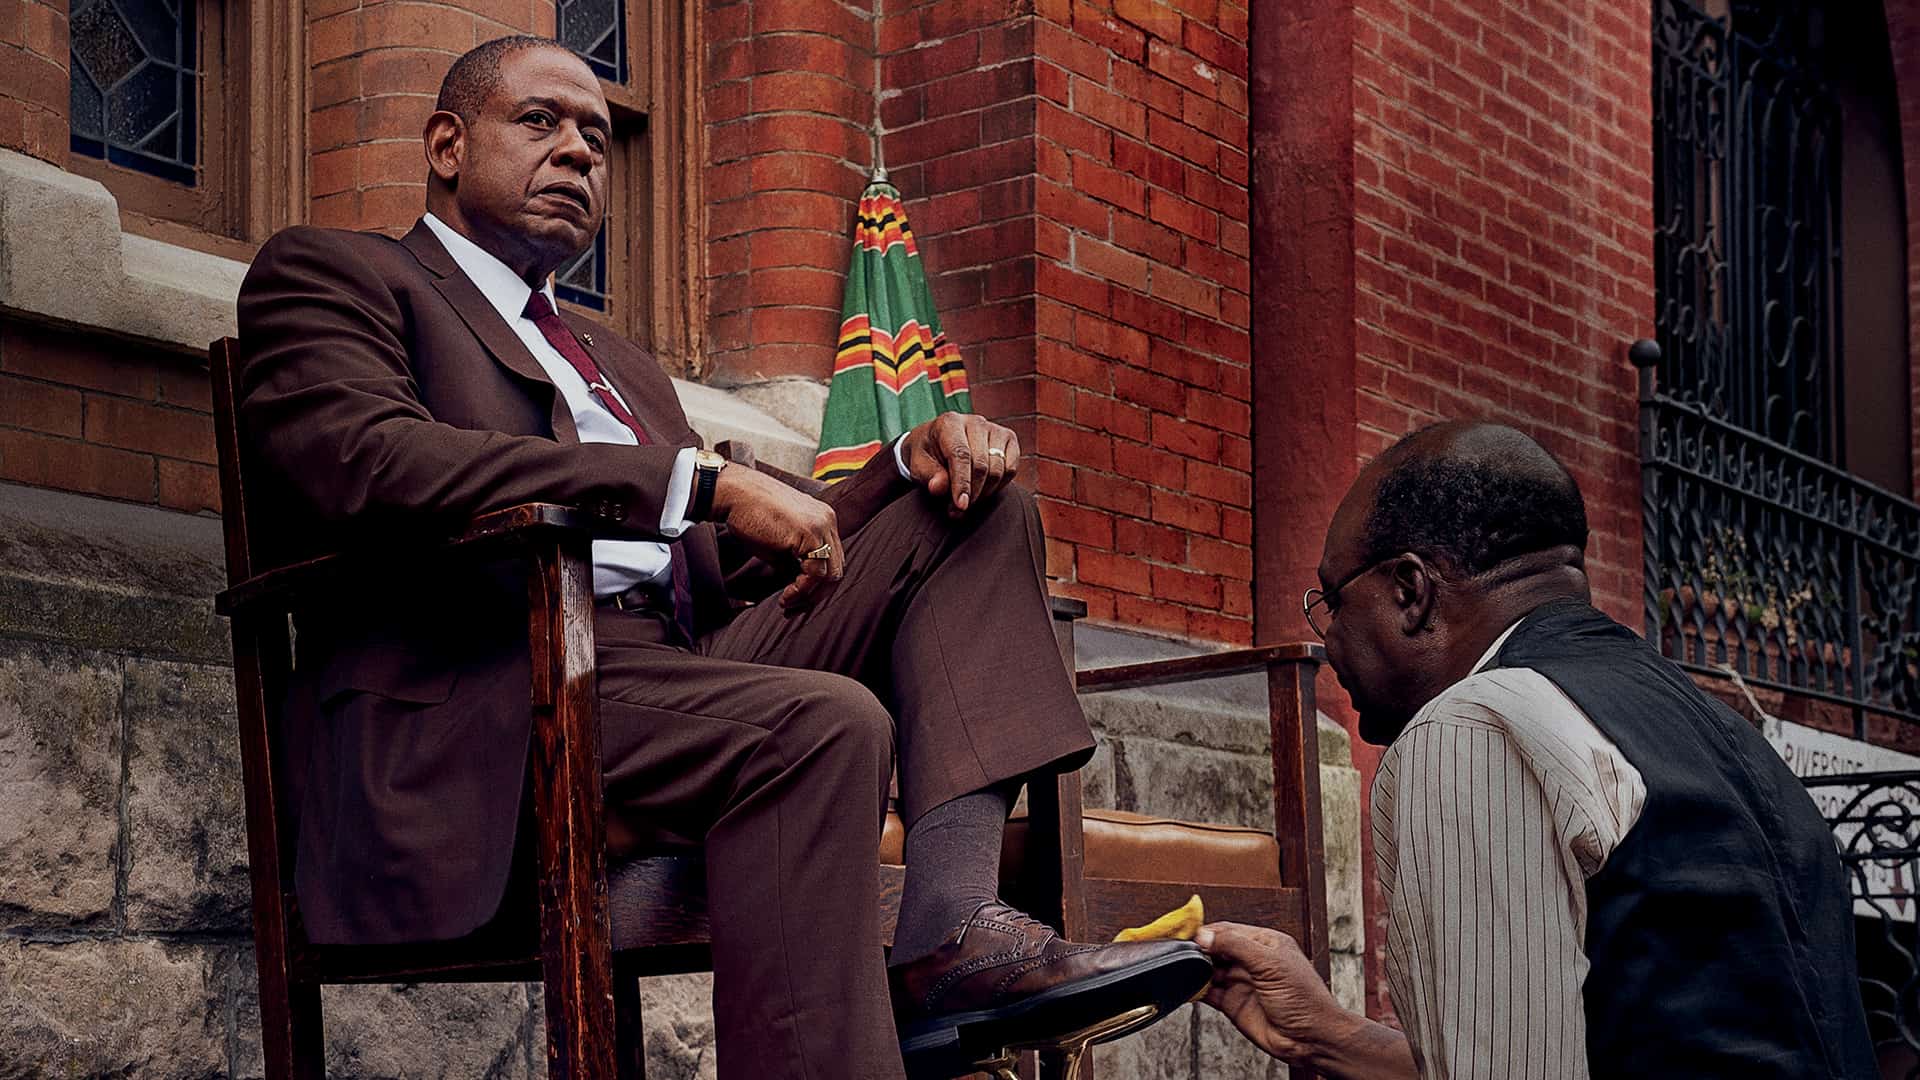 Forest Whitaker stars in the new hit series 'Godfather of Harlem'